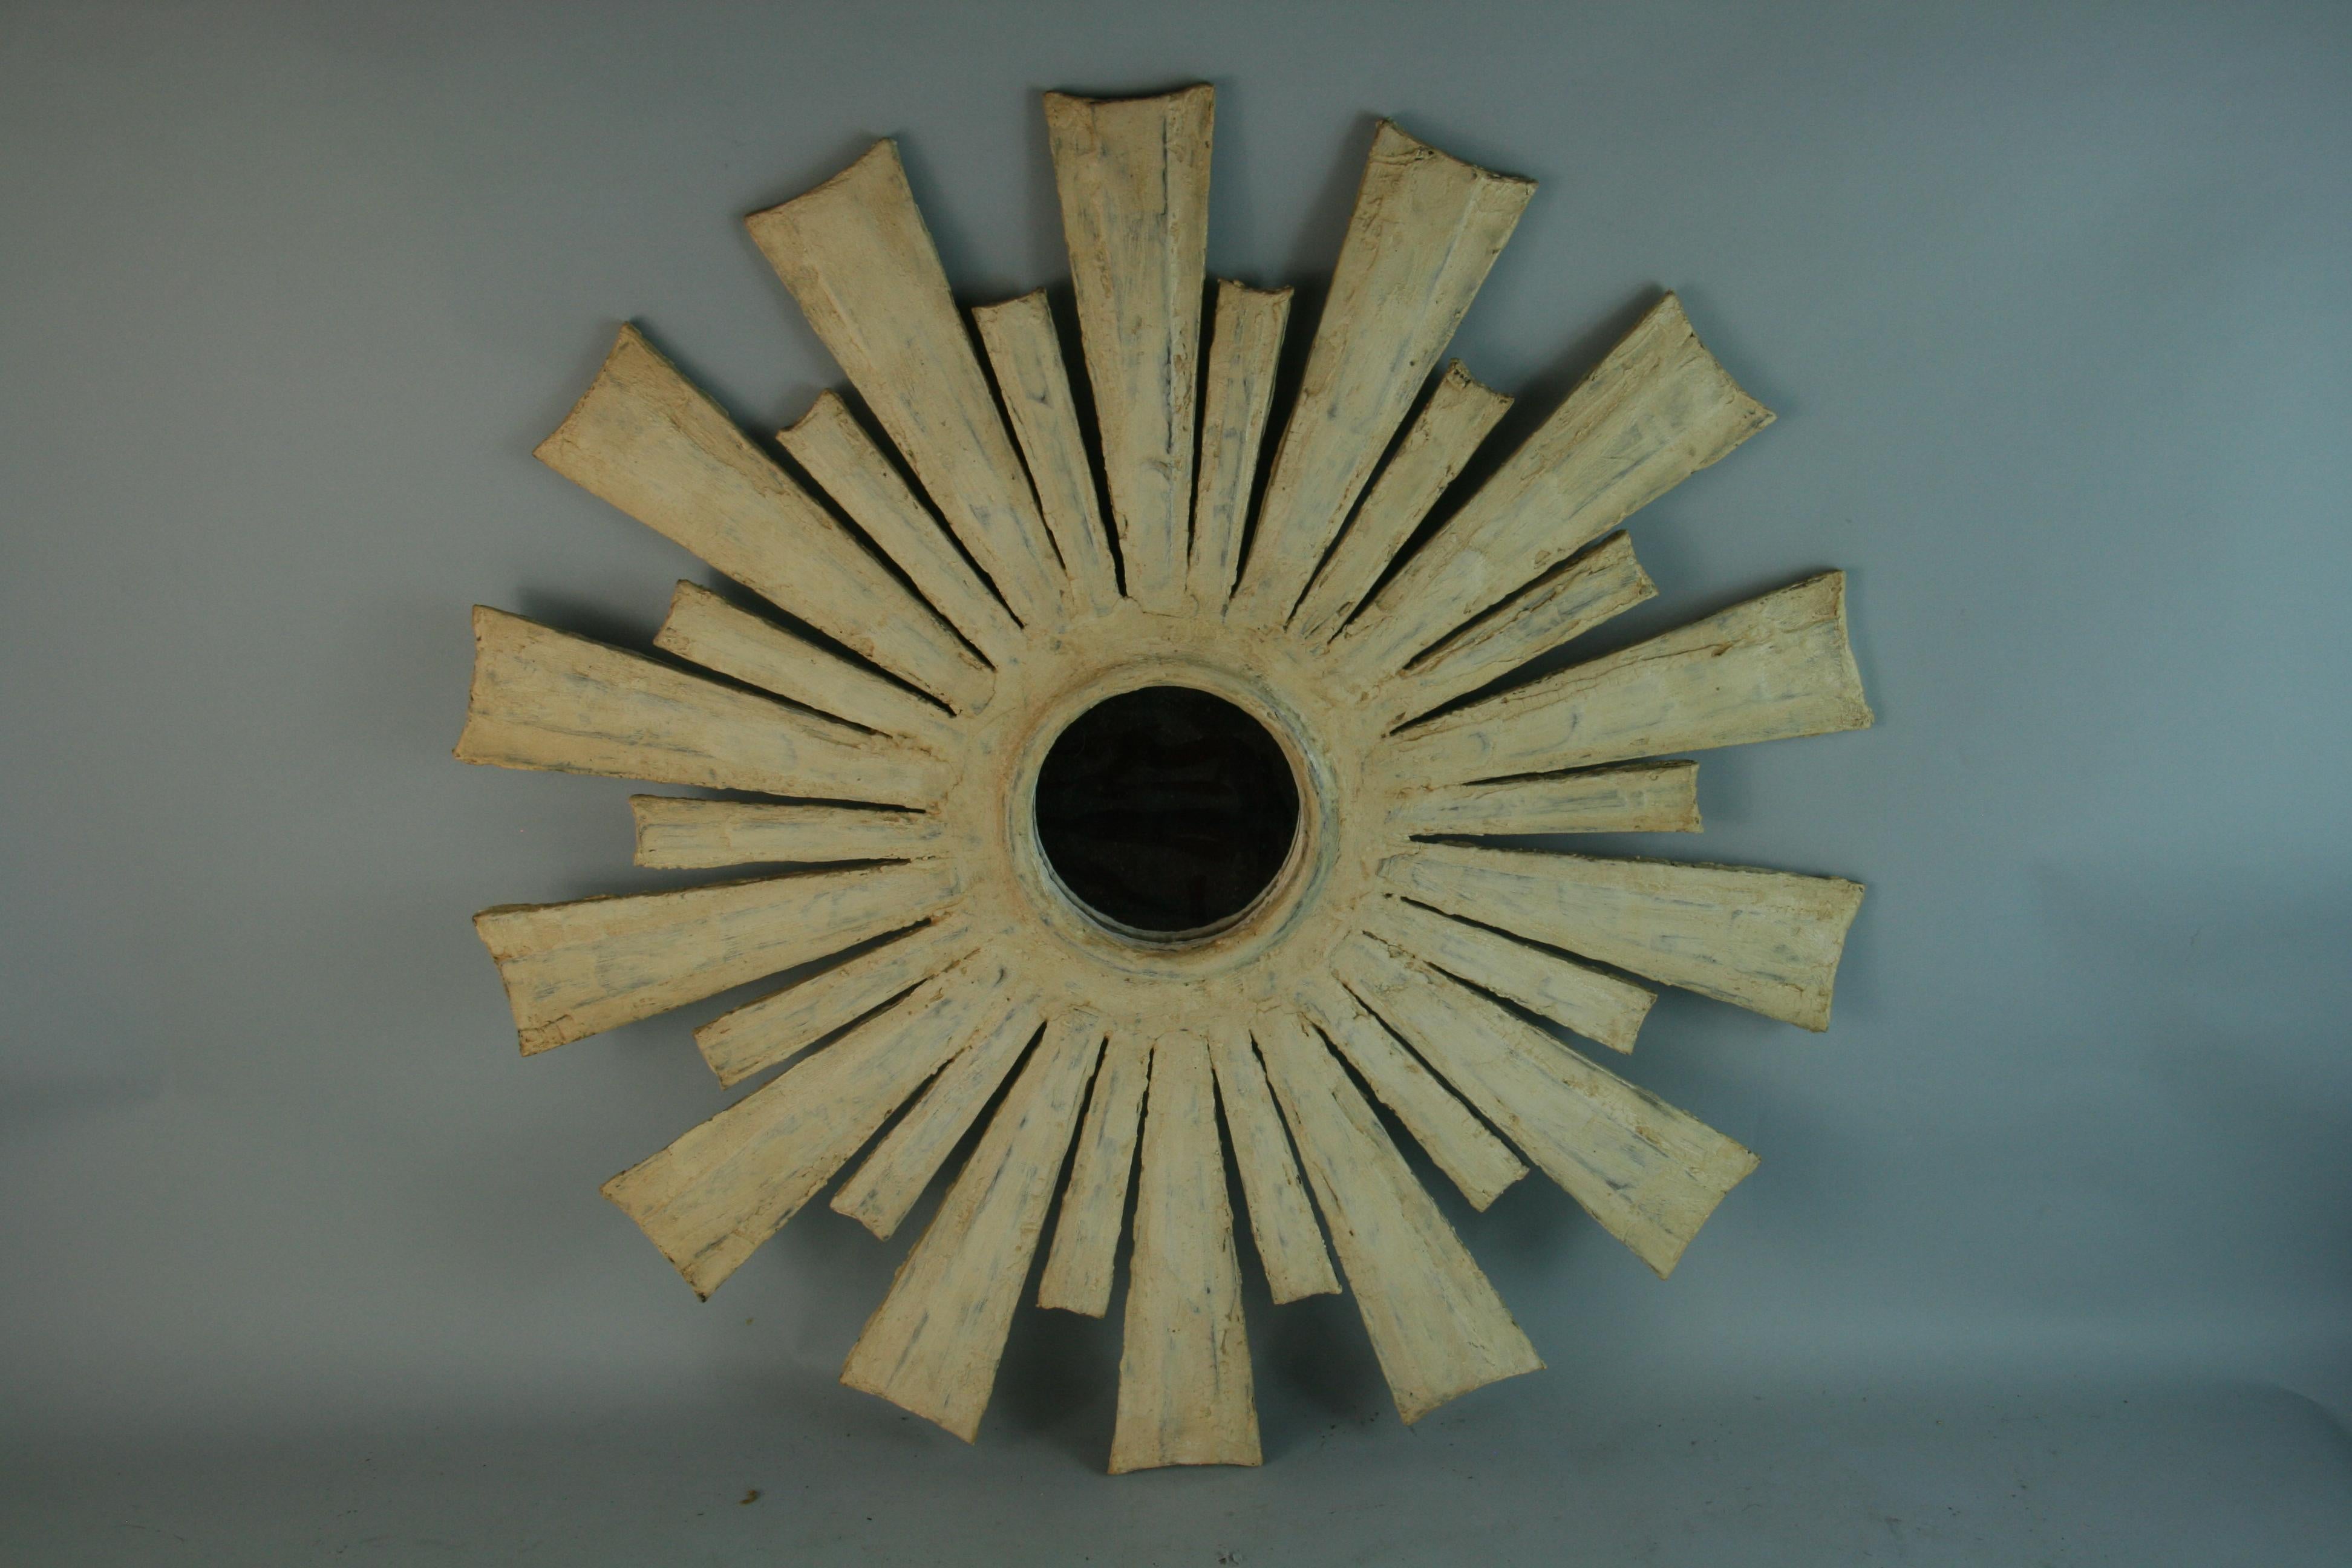 1504
Hand made wood starburst mirror covered in plaster